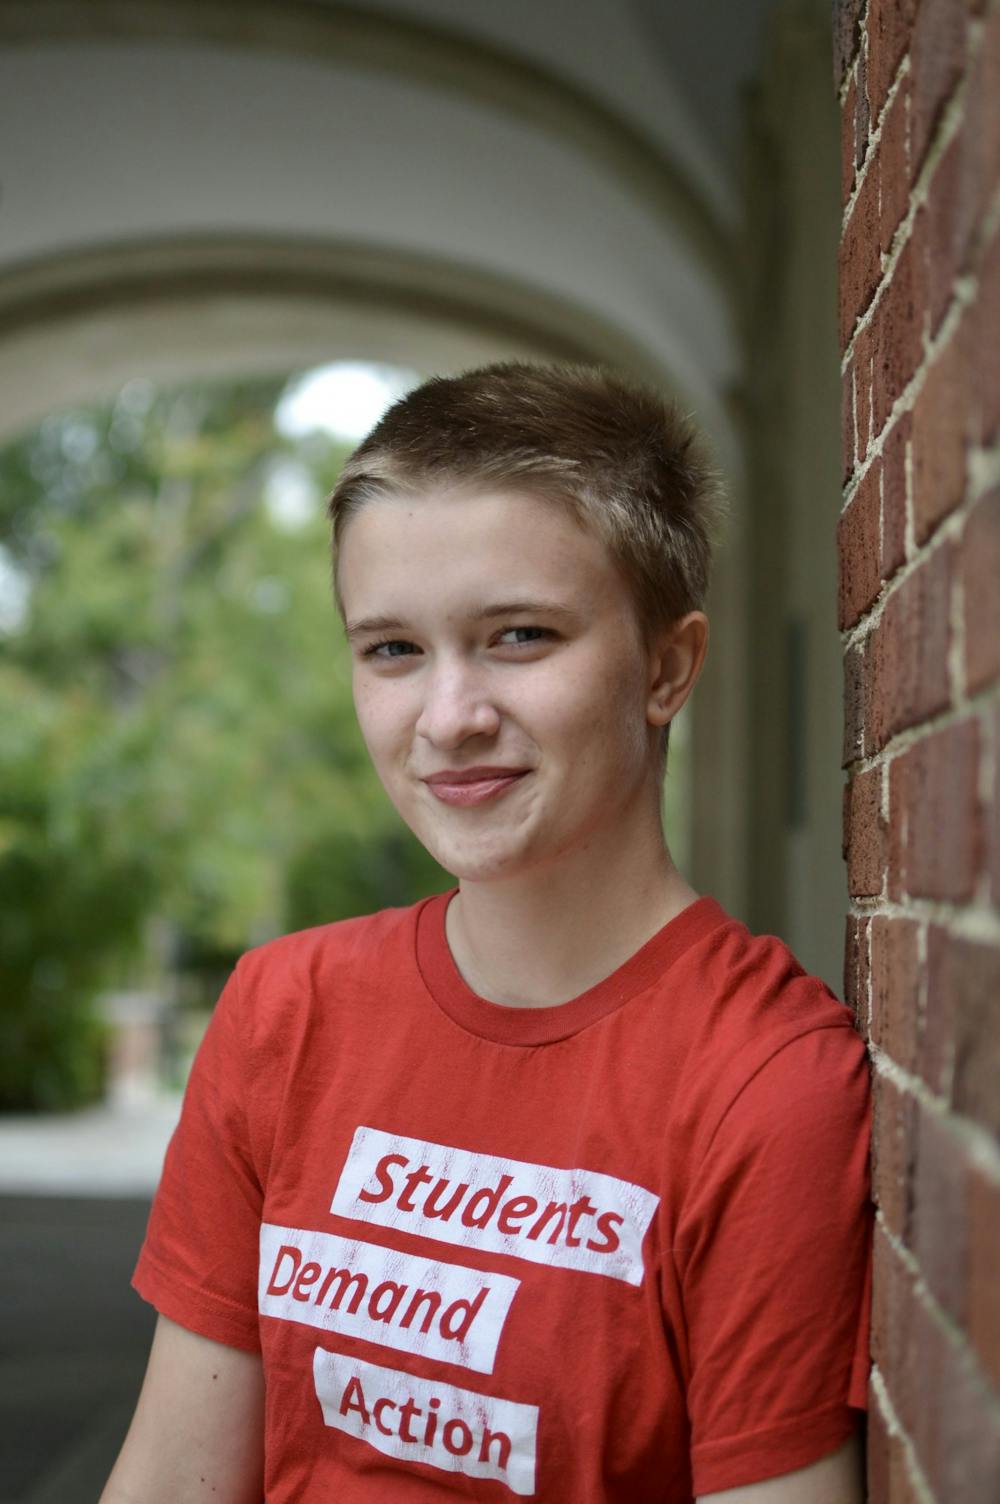 Peren Tiemann has been active in the activist group Students Demand Action for over four years. Now, as a first-year at Miami University, they are still active in the effort to end gun violence in the U.S., and hope to start a Students Demand Action group at Miami.